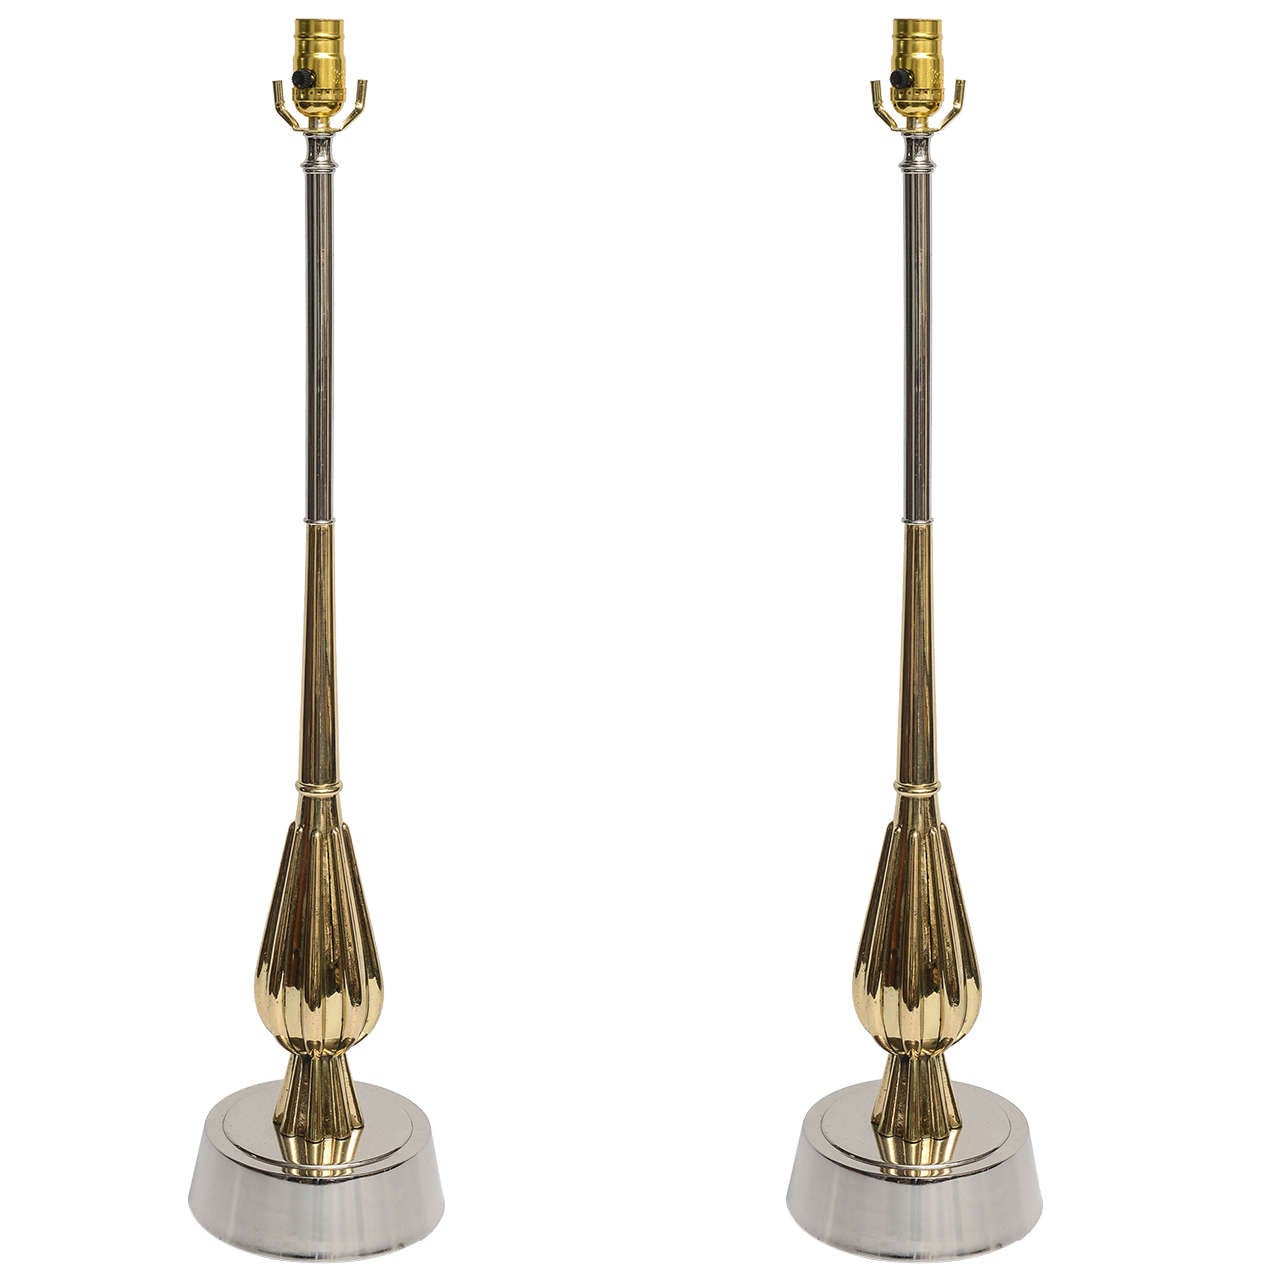 Pair of Tall Nickel and Brass Rembrandt Lamps